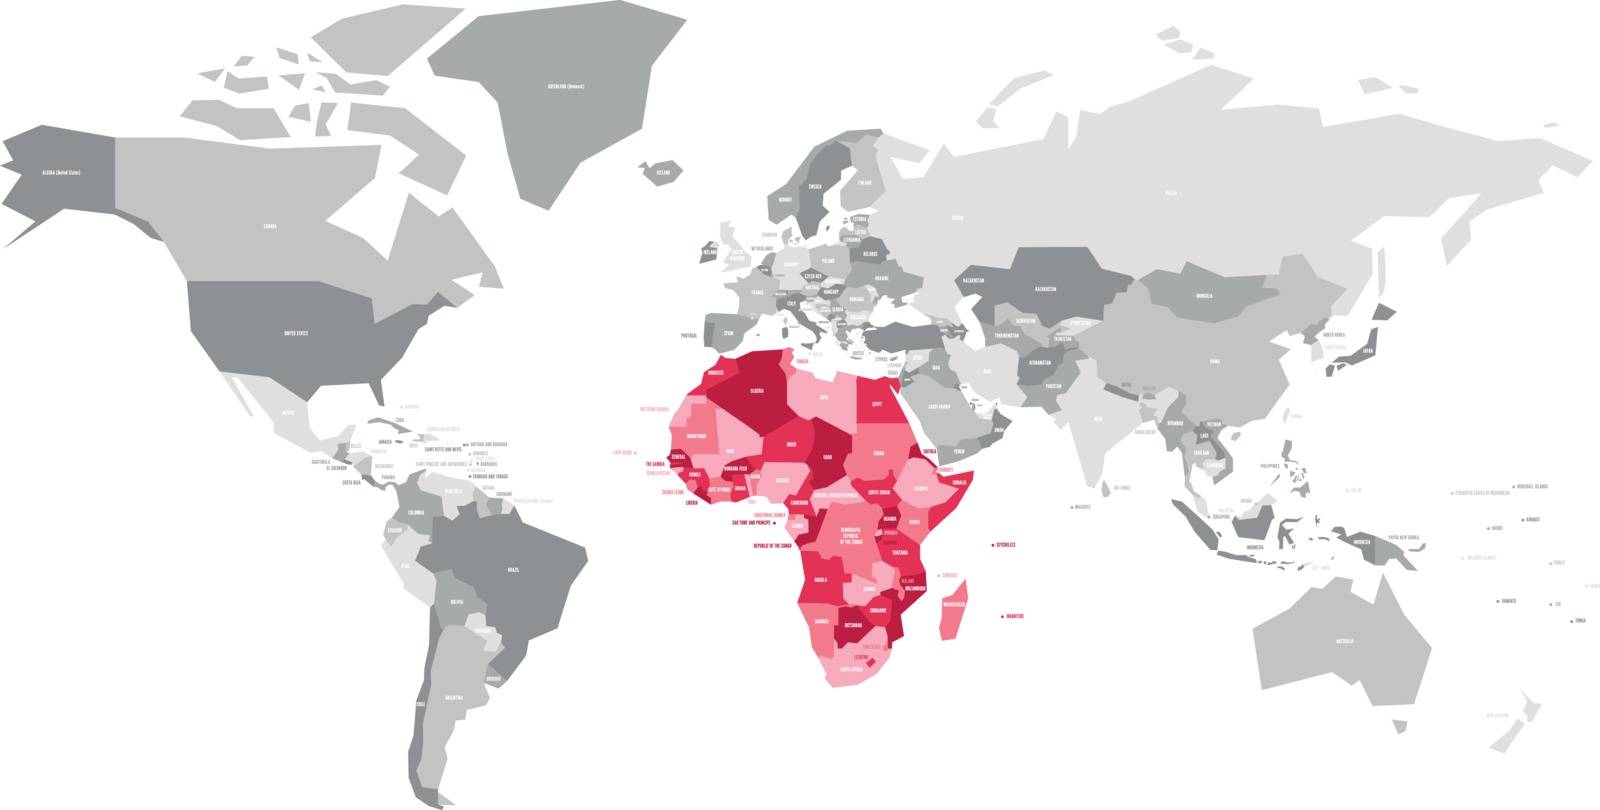 Map of World in grey colors with red highlighted countries of Africa. Vector illustration.